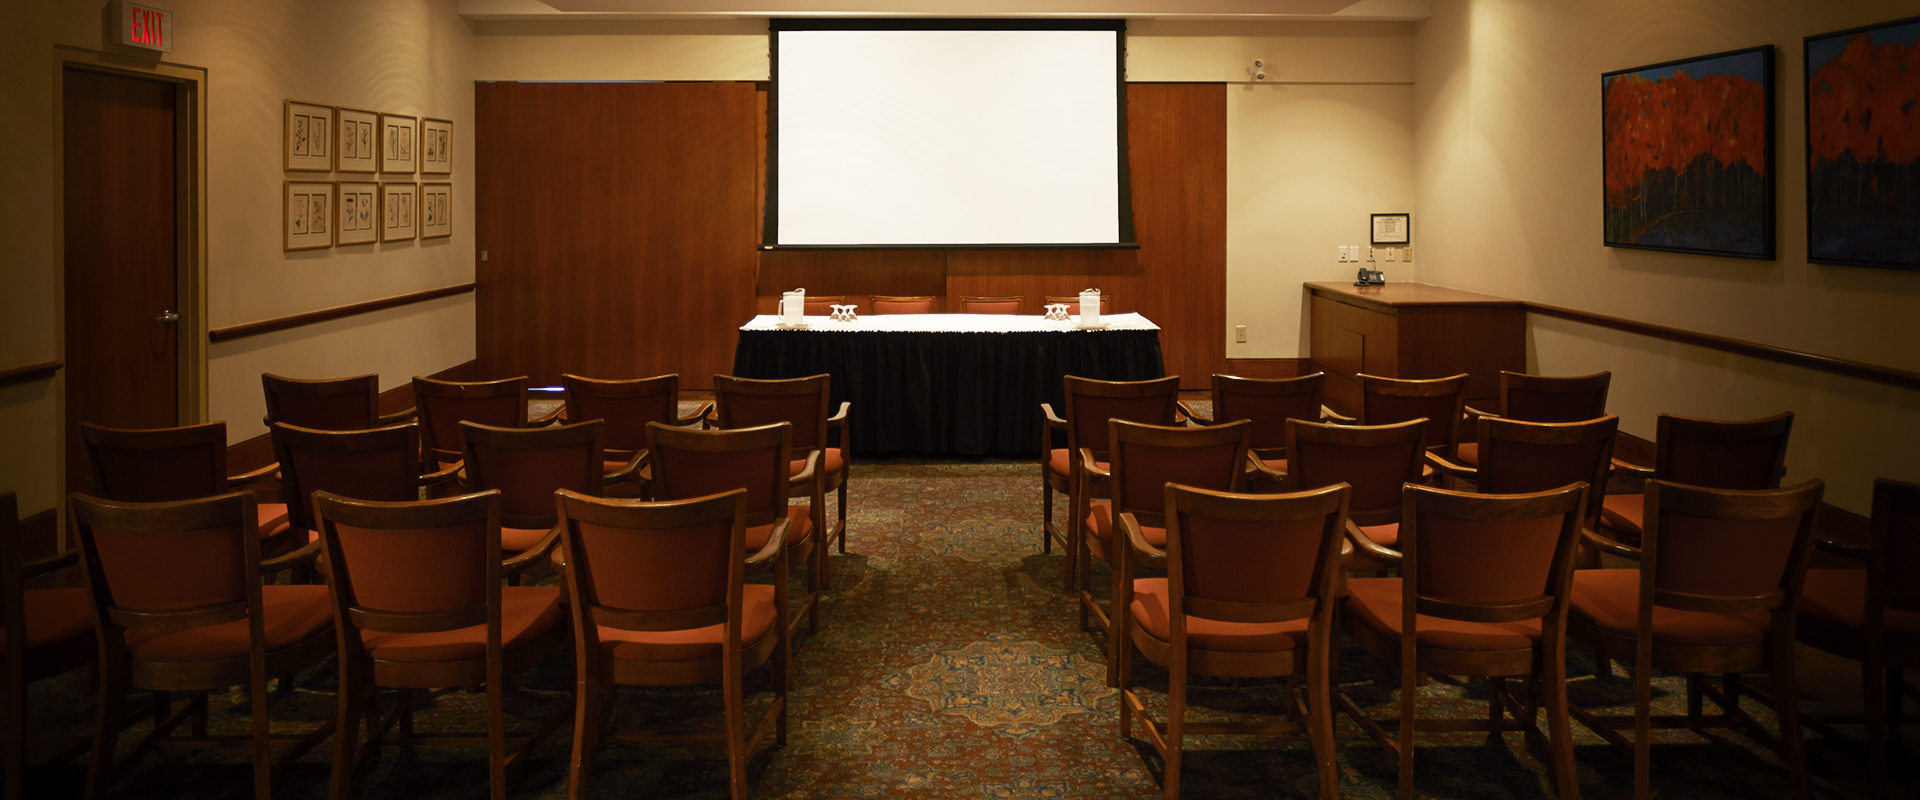 Meeting room set up for a presentation with theatre-style seating